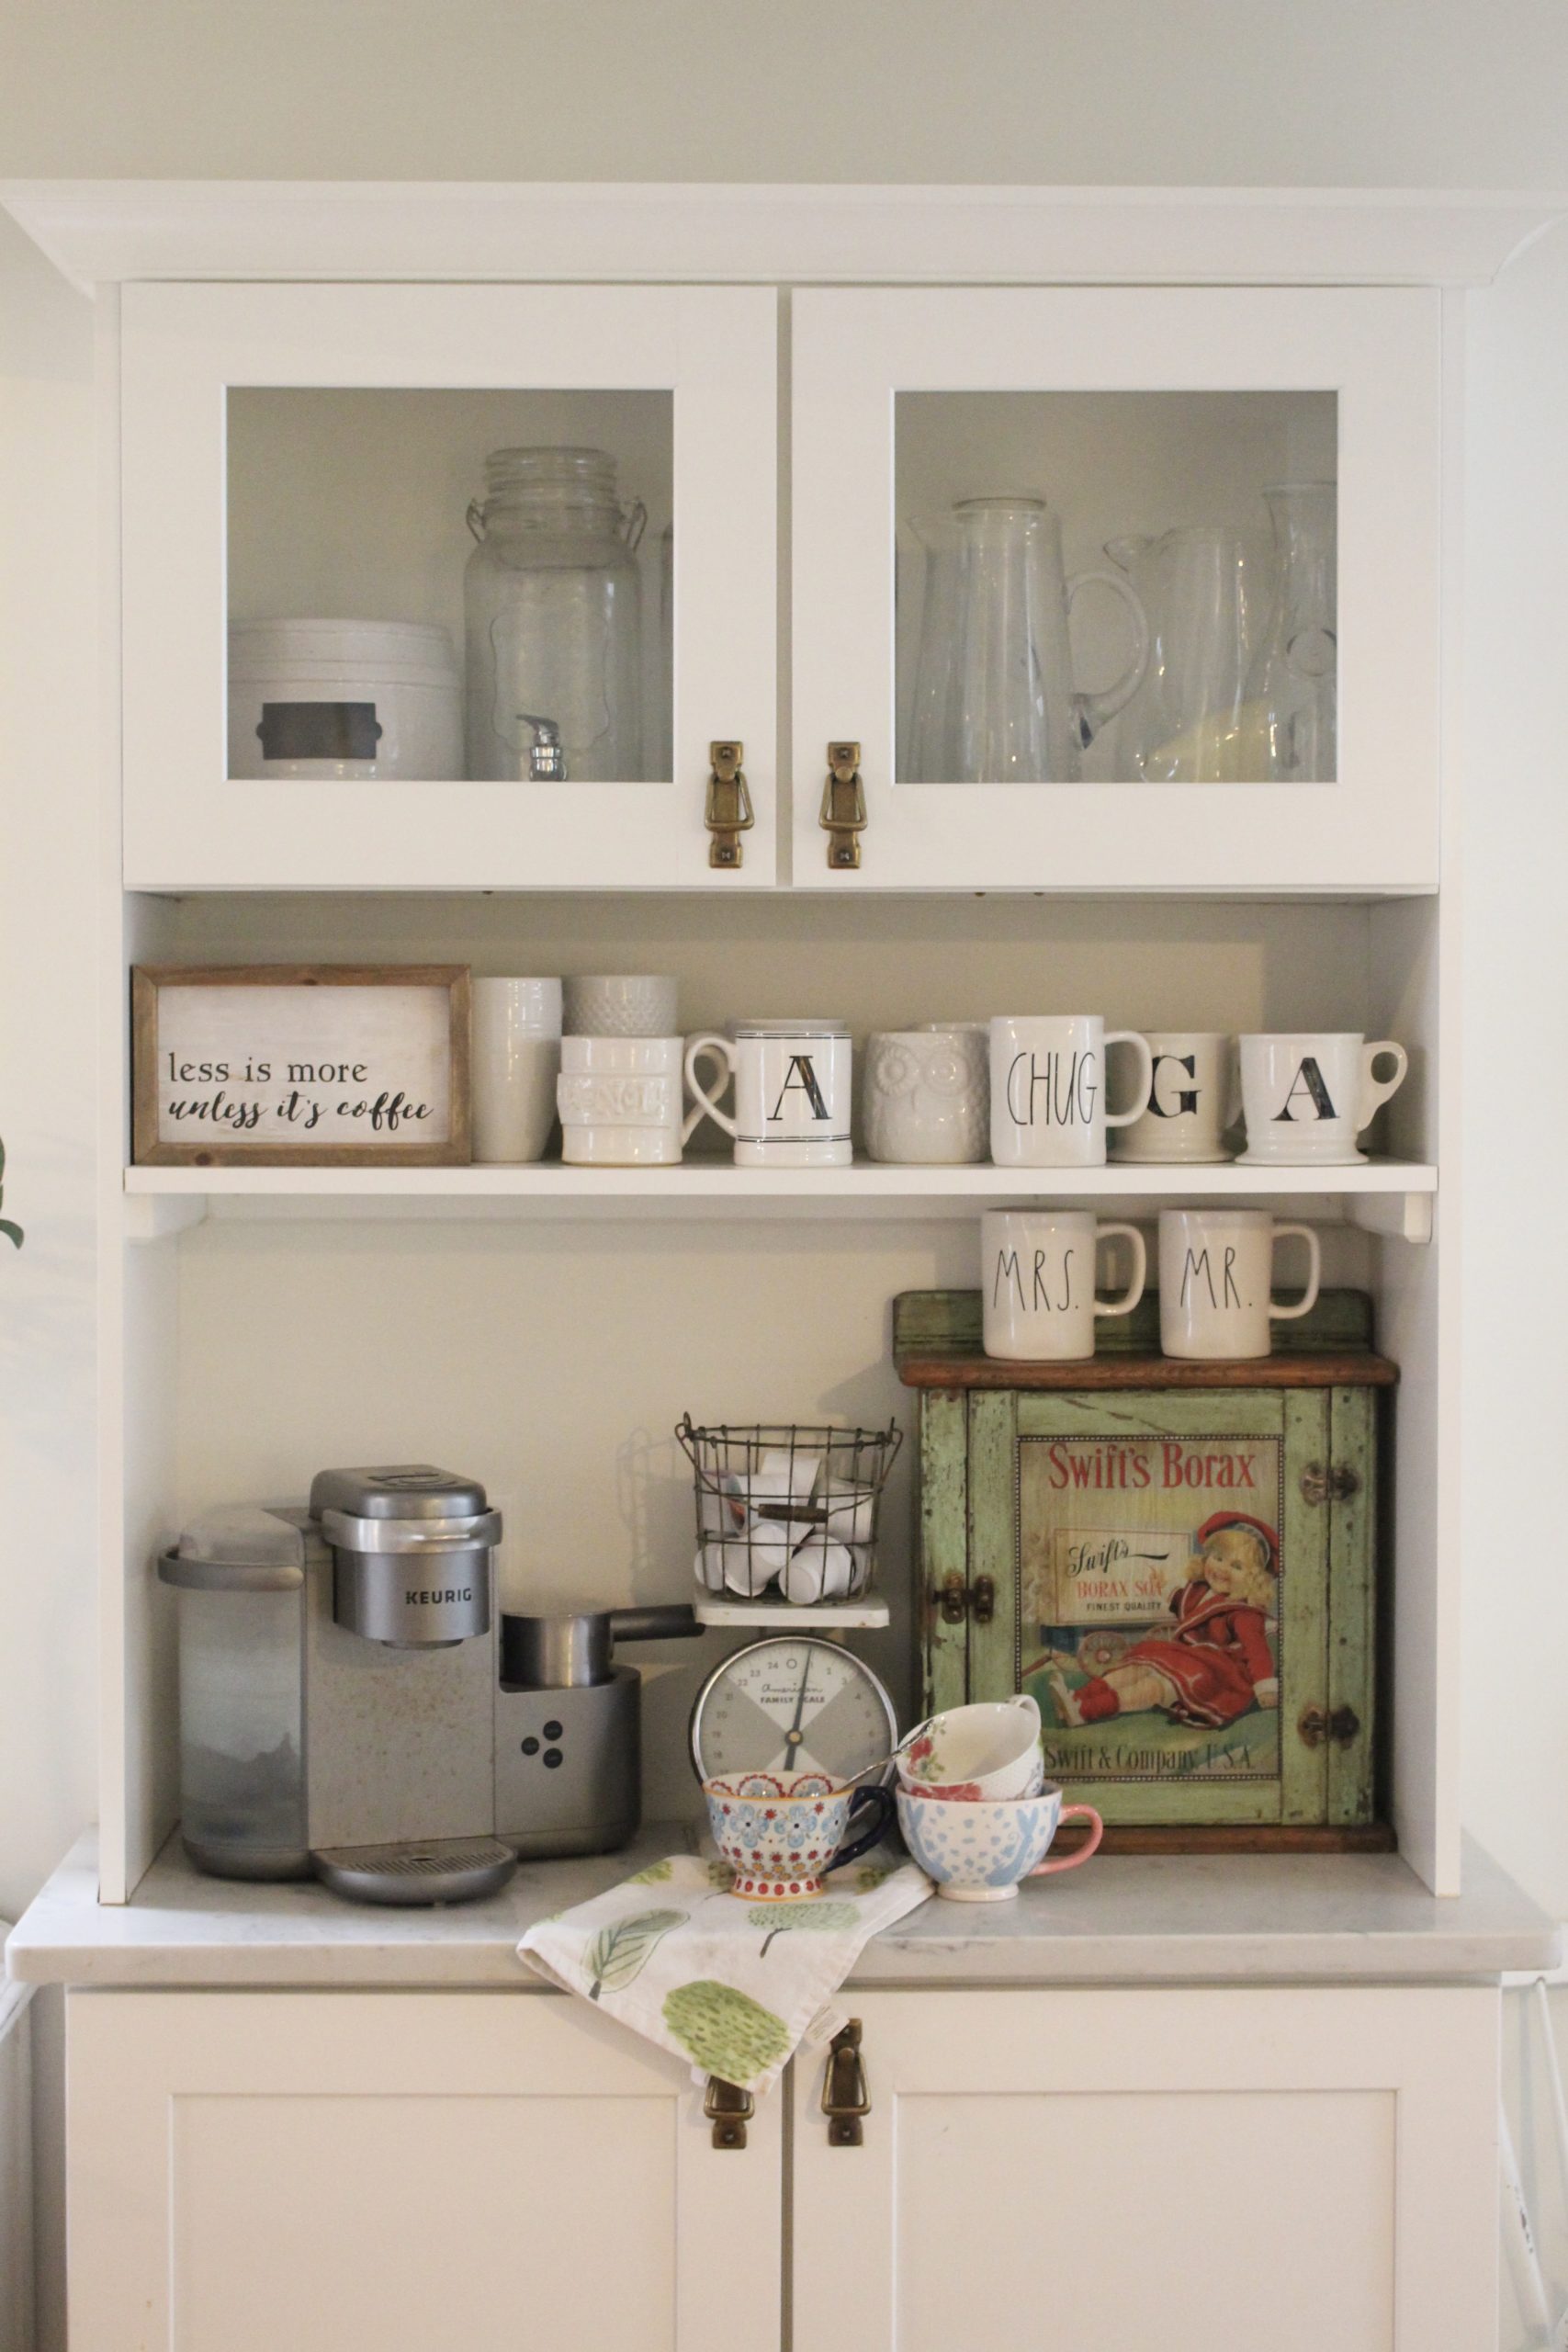 Thrift Store Cabinet Updated with Chalk Paint for a Coffee Bar.- diy- projects- painting furniture- using chalk paint- updating furniture- rusteoleum linen white chalk paint- coffee bar- coffee station